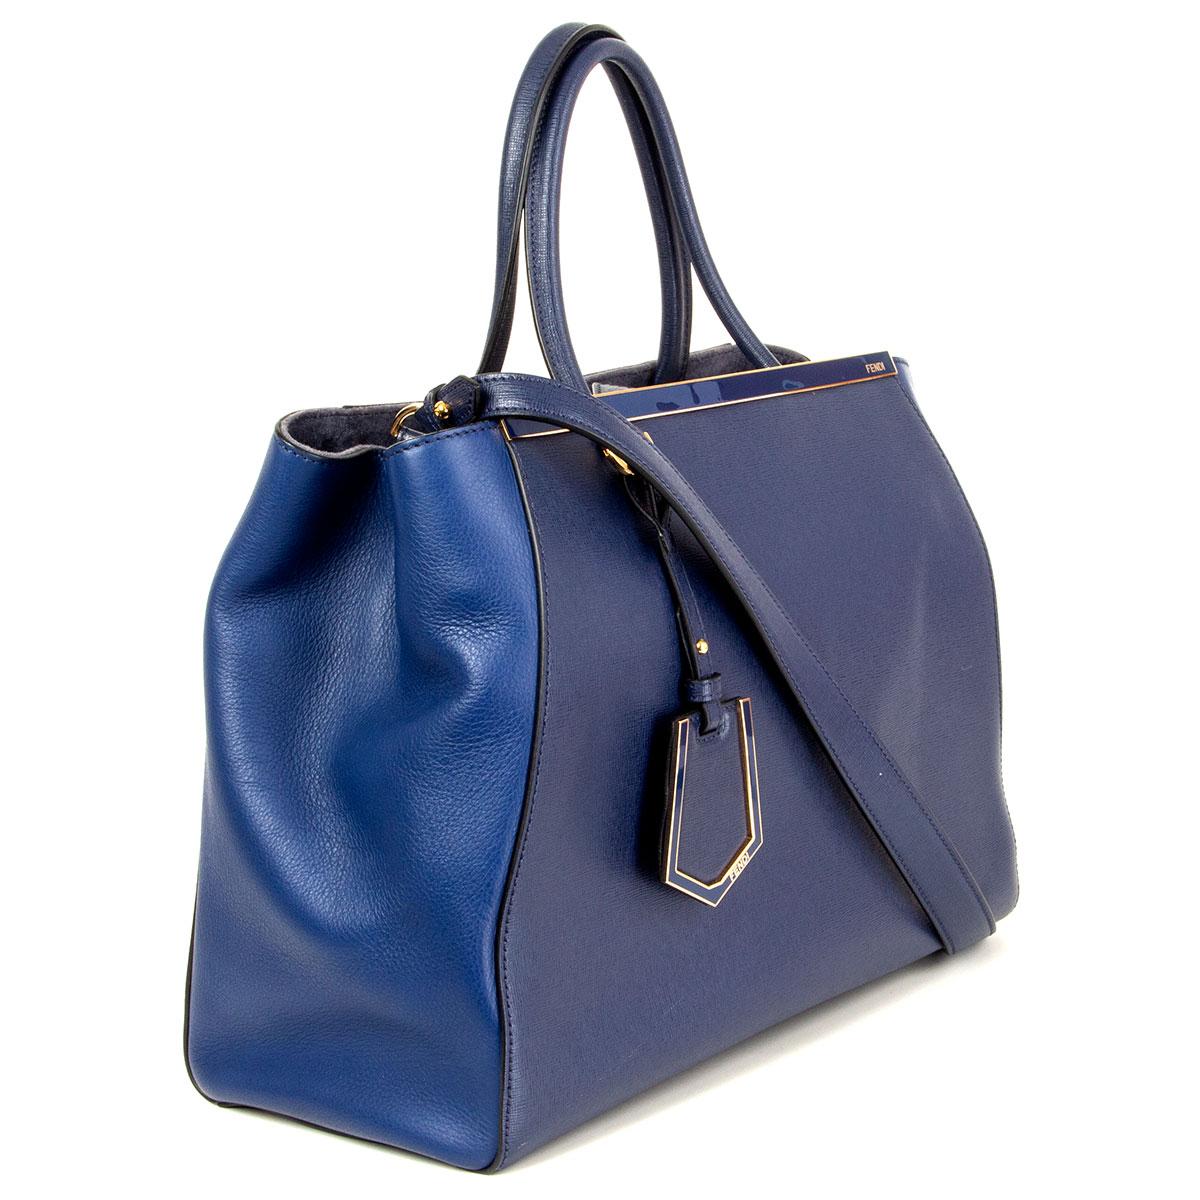 100% authentic Fendi 2Jours Medium tote shoulder bag in blue calfskin leather (100%) with shoulder strap. Closes with one snap button at top and has two interior-compartments with one zipper pocket in the middle and two flat pockets against the